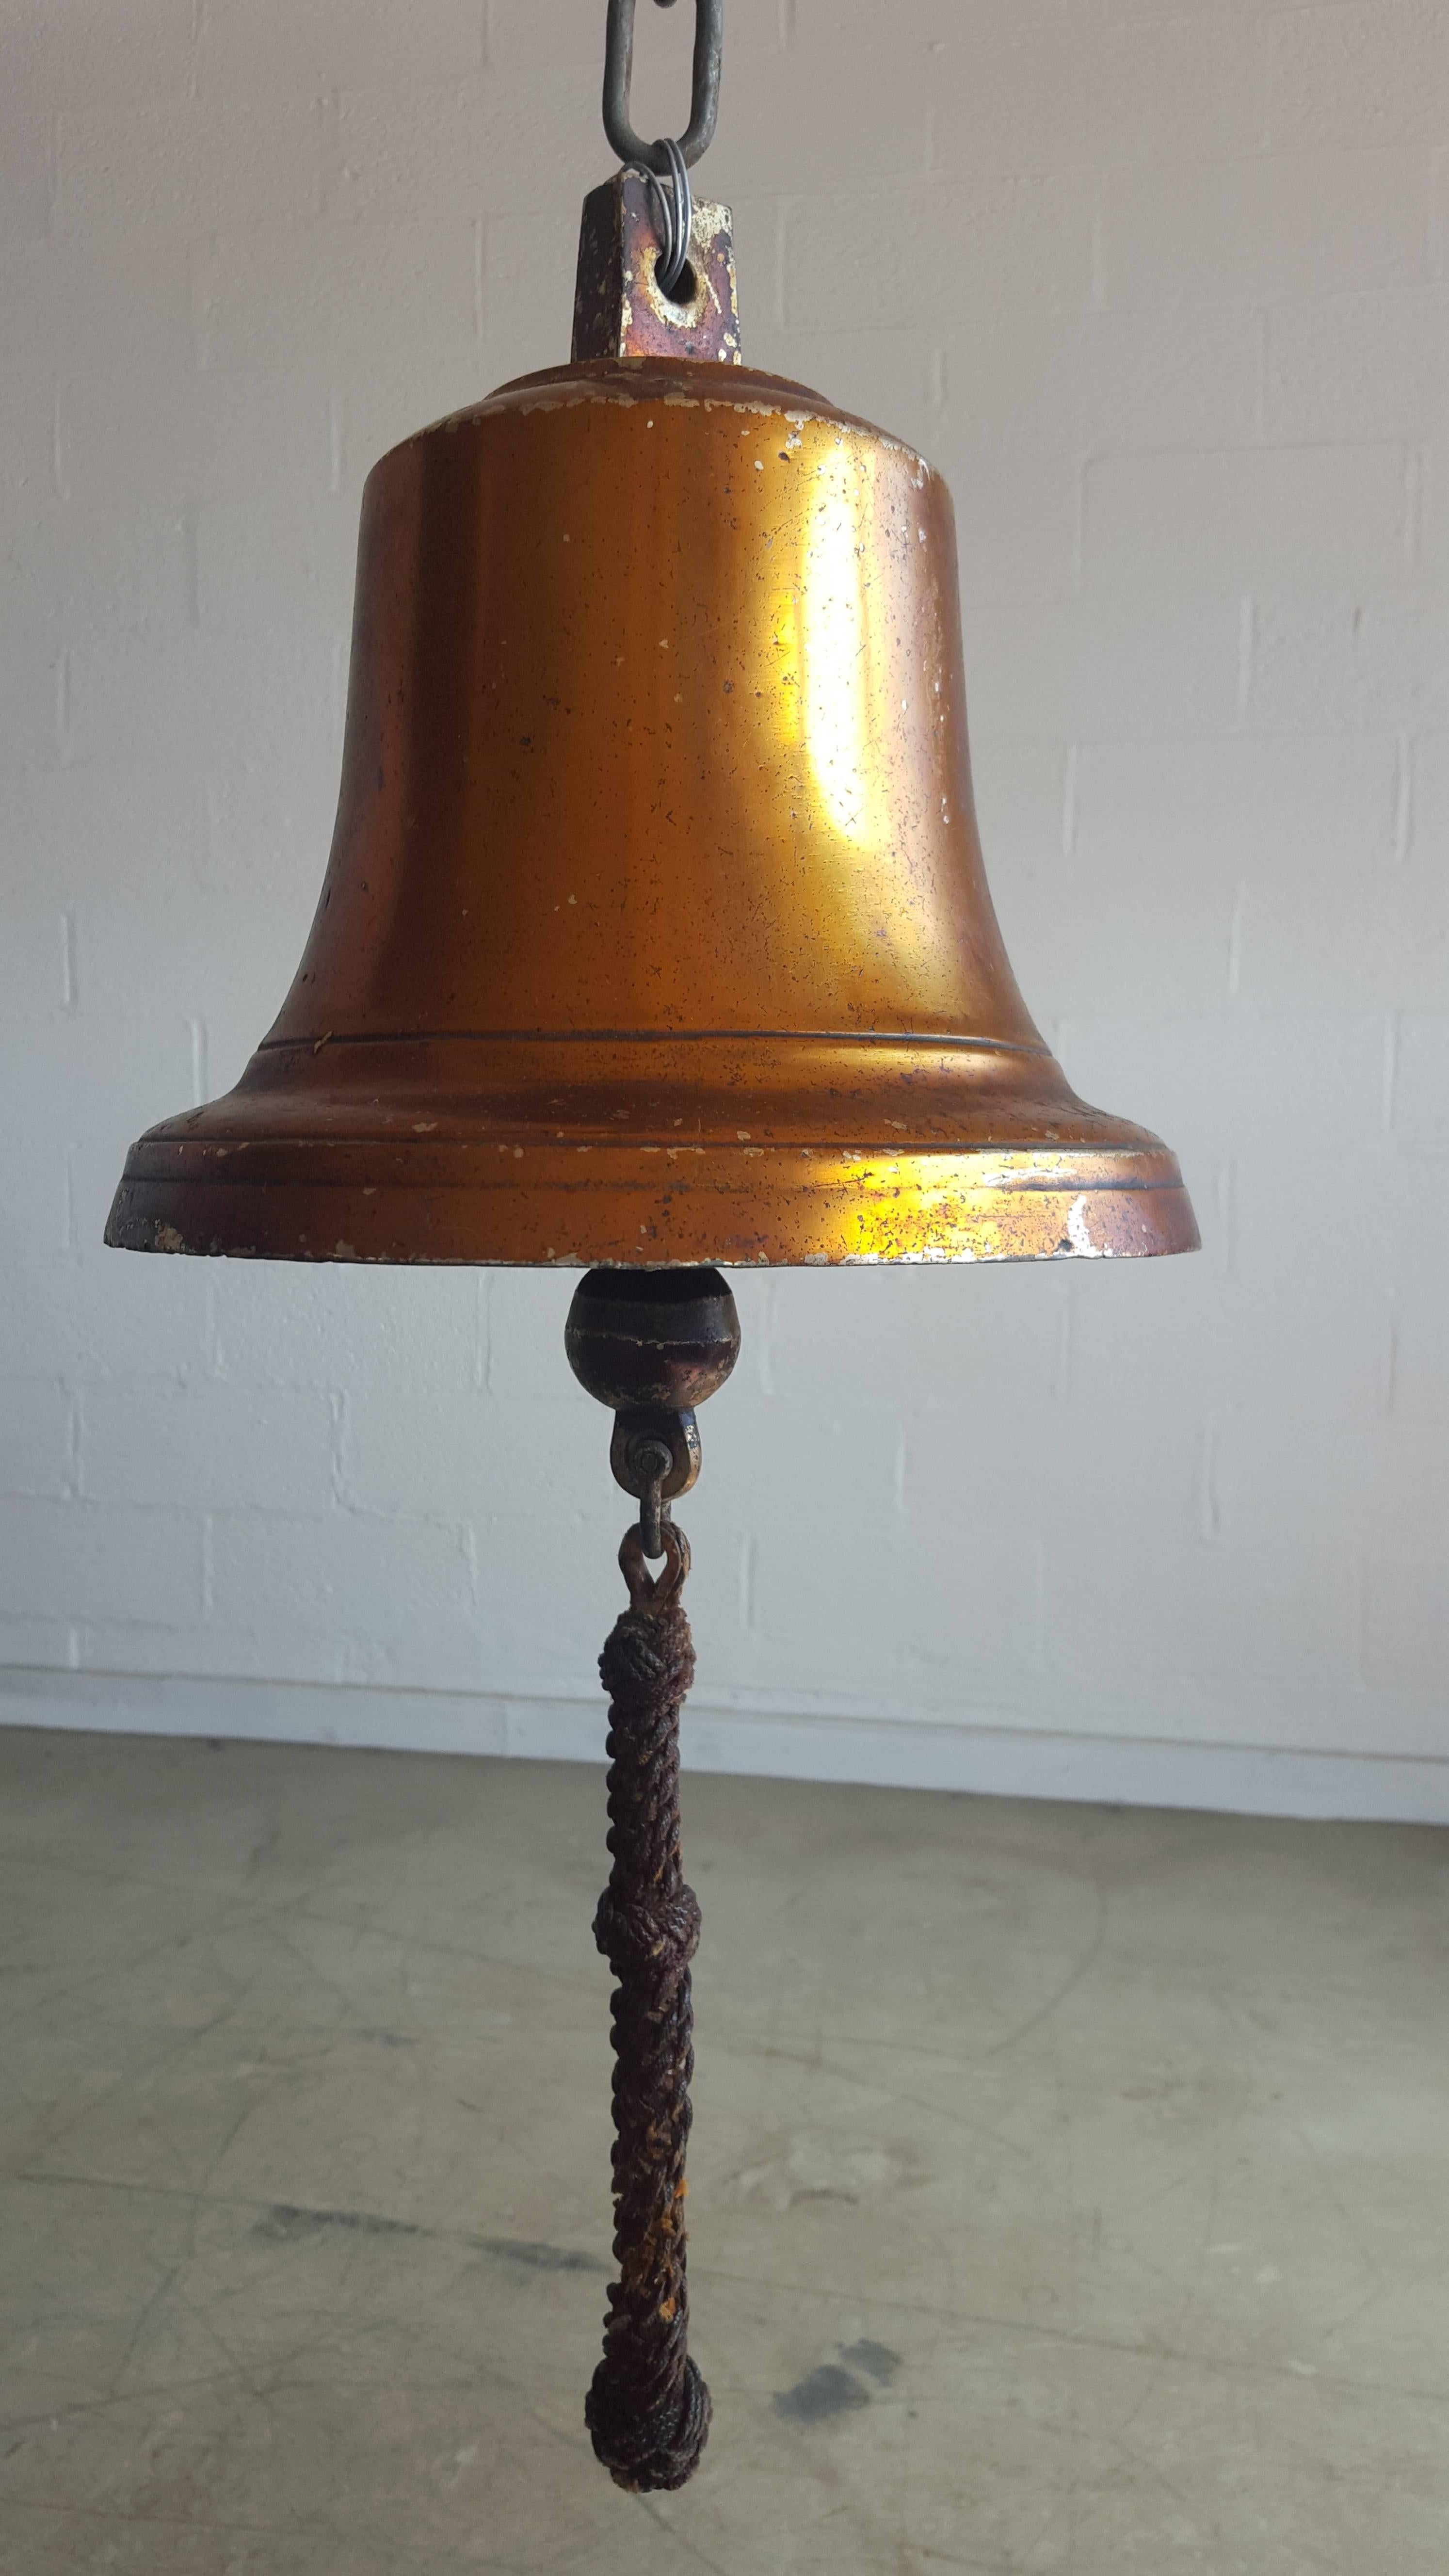 Very nice original Danish ships bell in brass made circa 1930s as far as we can judge. The bell has at a point in time been given a coat or two of boat varnish which the sun, salt, water and wind have turned into an amber colored glaze adding